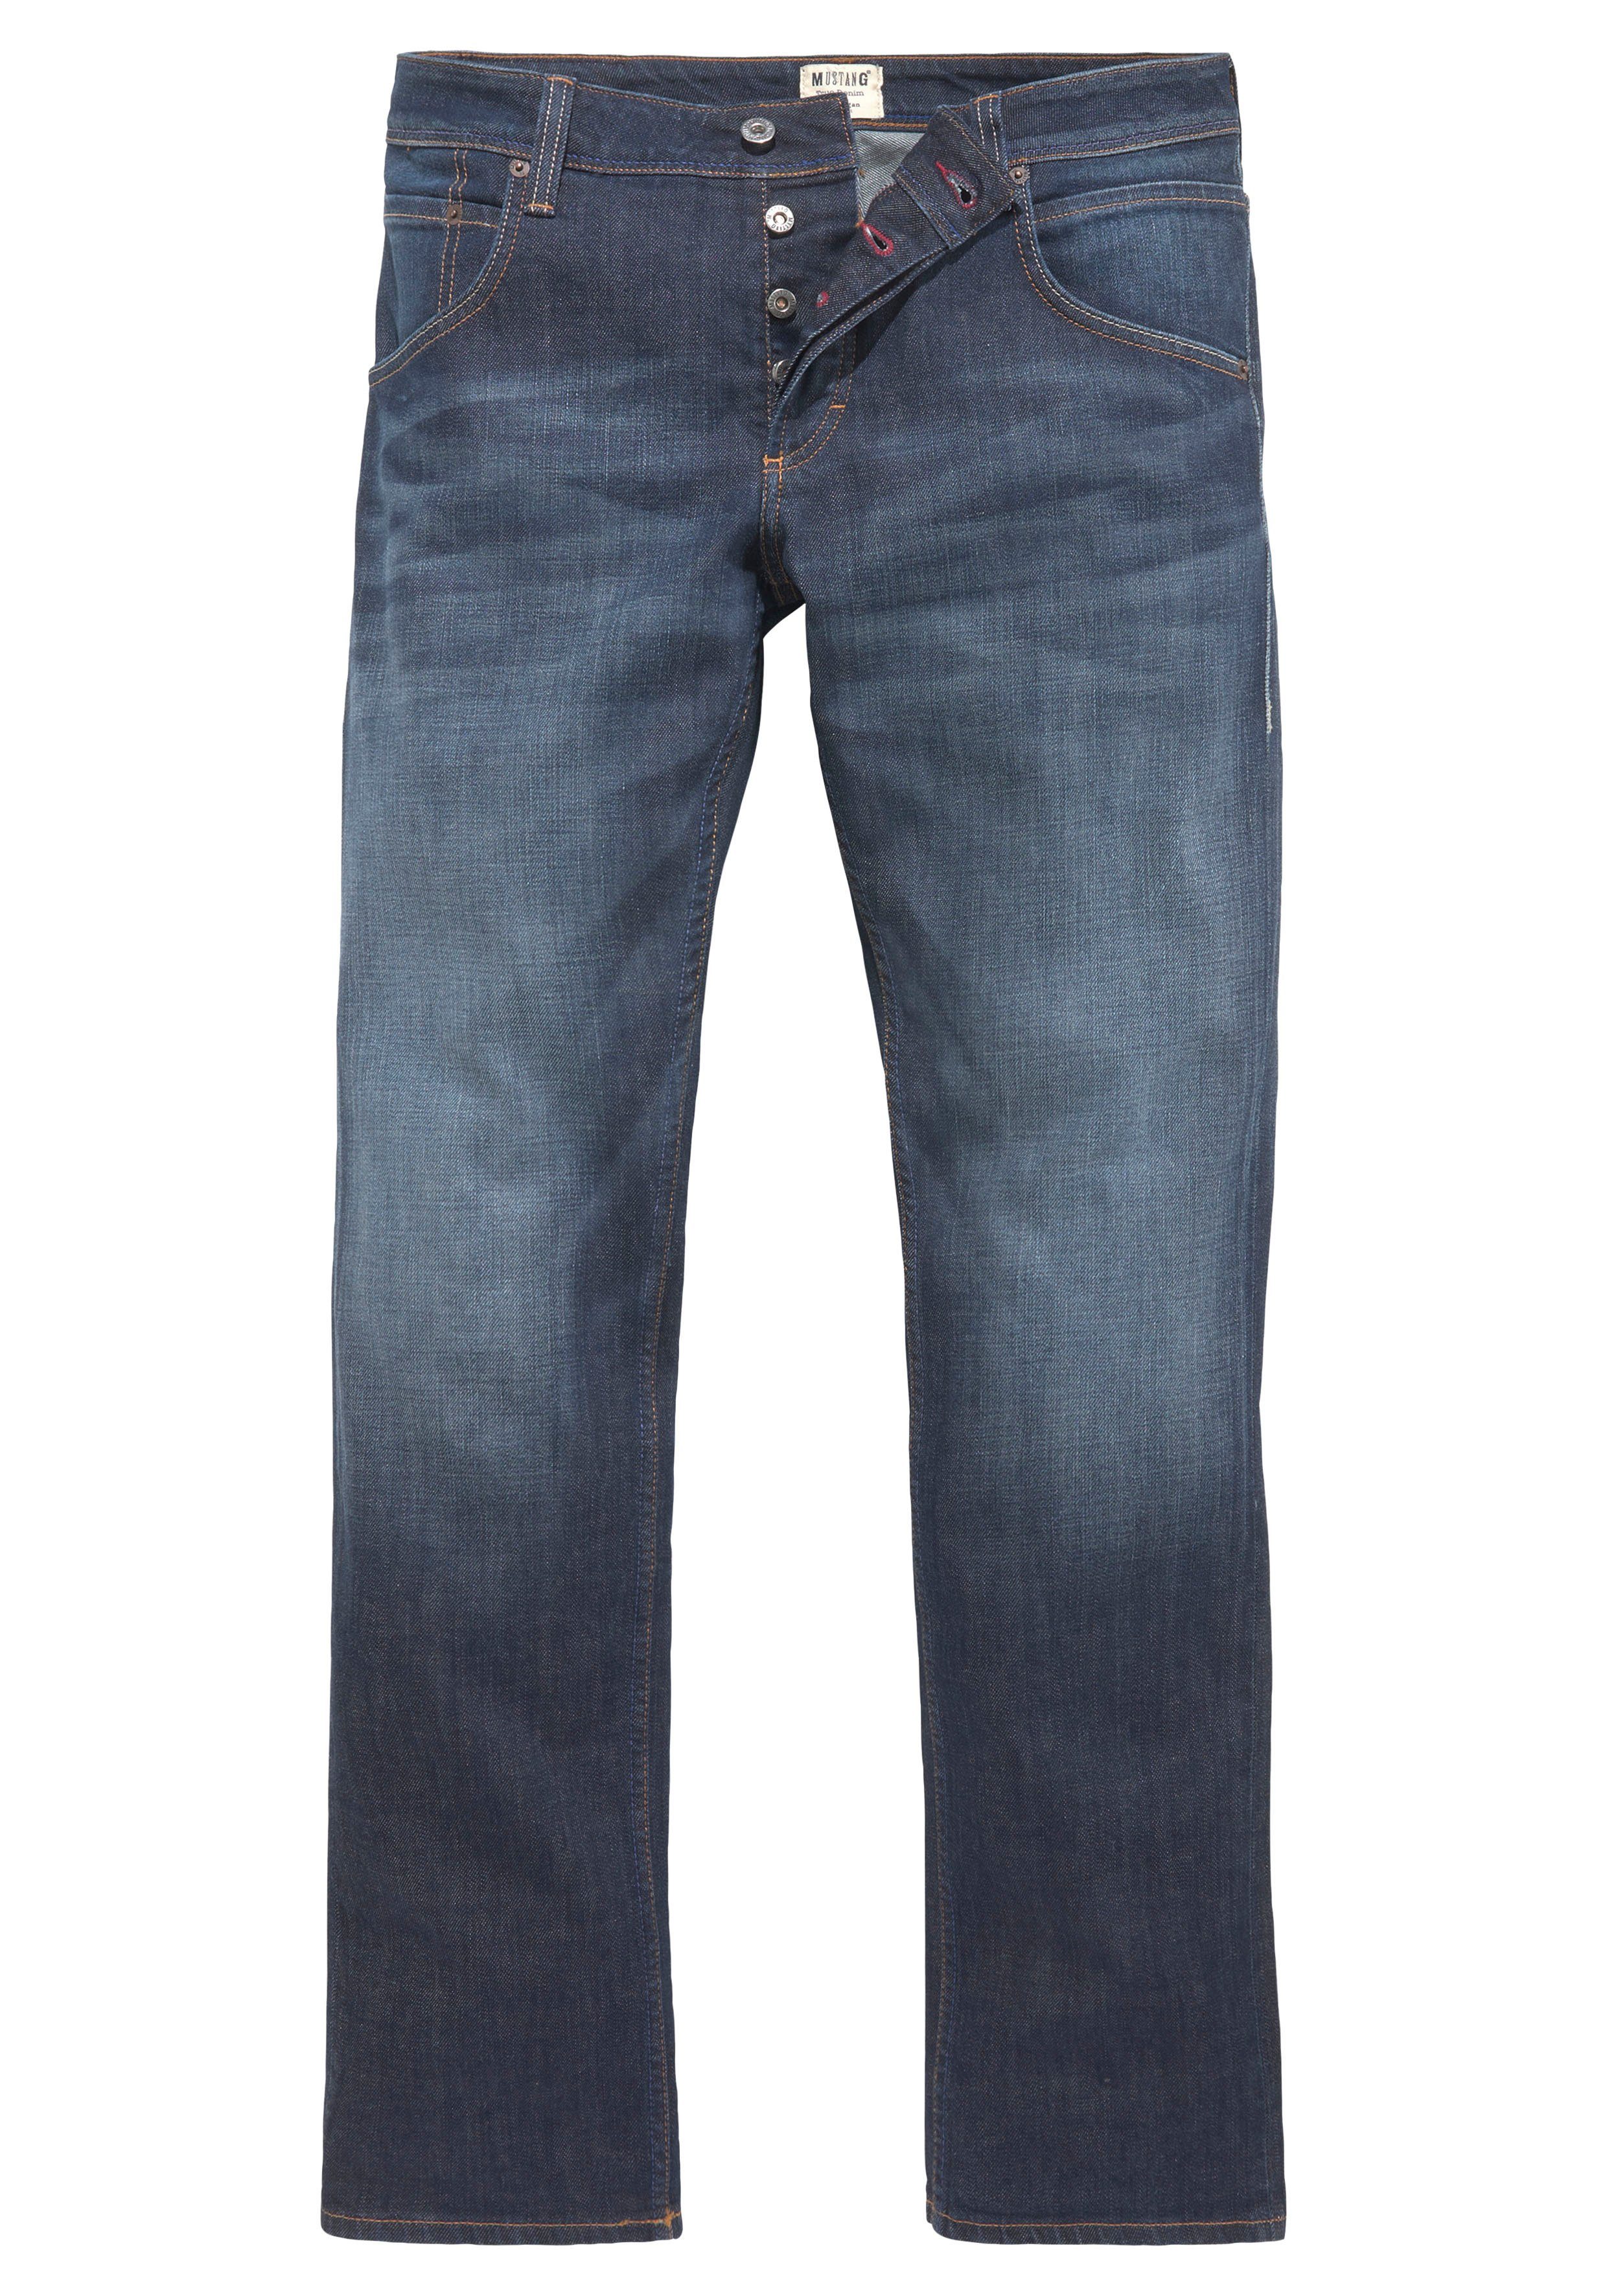 MUSTANG in STYLE STRAIGHT 5-Pocket-Form Straight-Jeans MICHIGAN dark-rinse